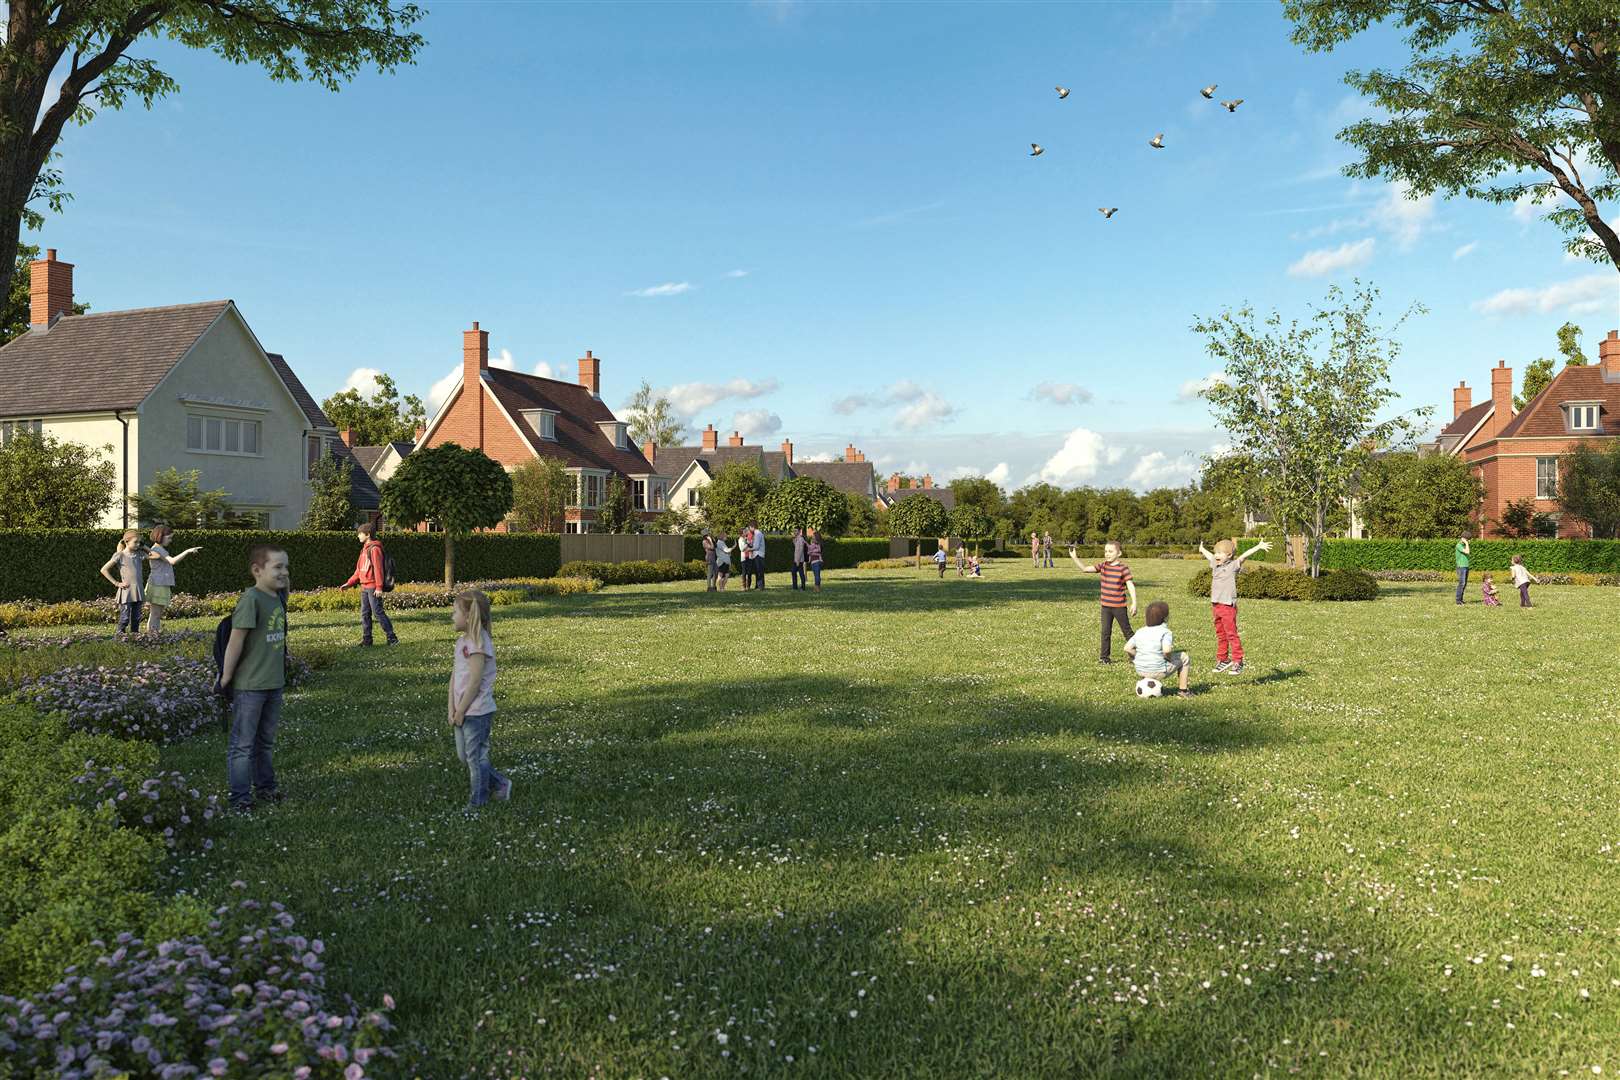 Despite the loss of a field, green spaces are being offered throughout the Quinn Estates scheme